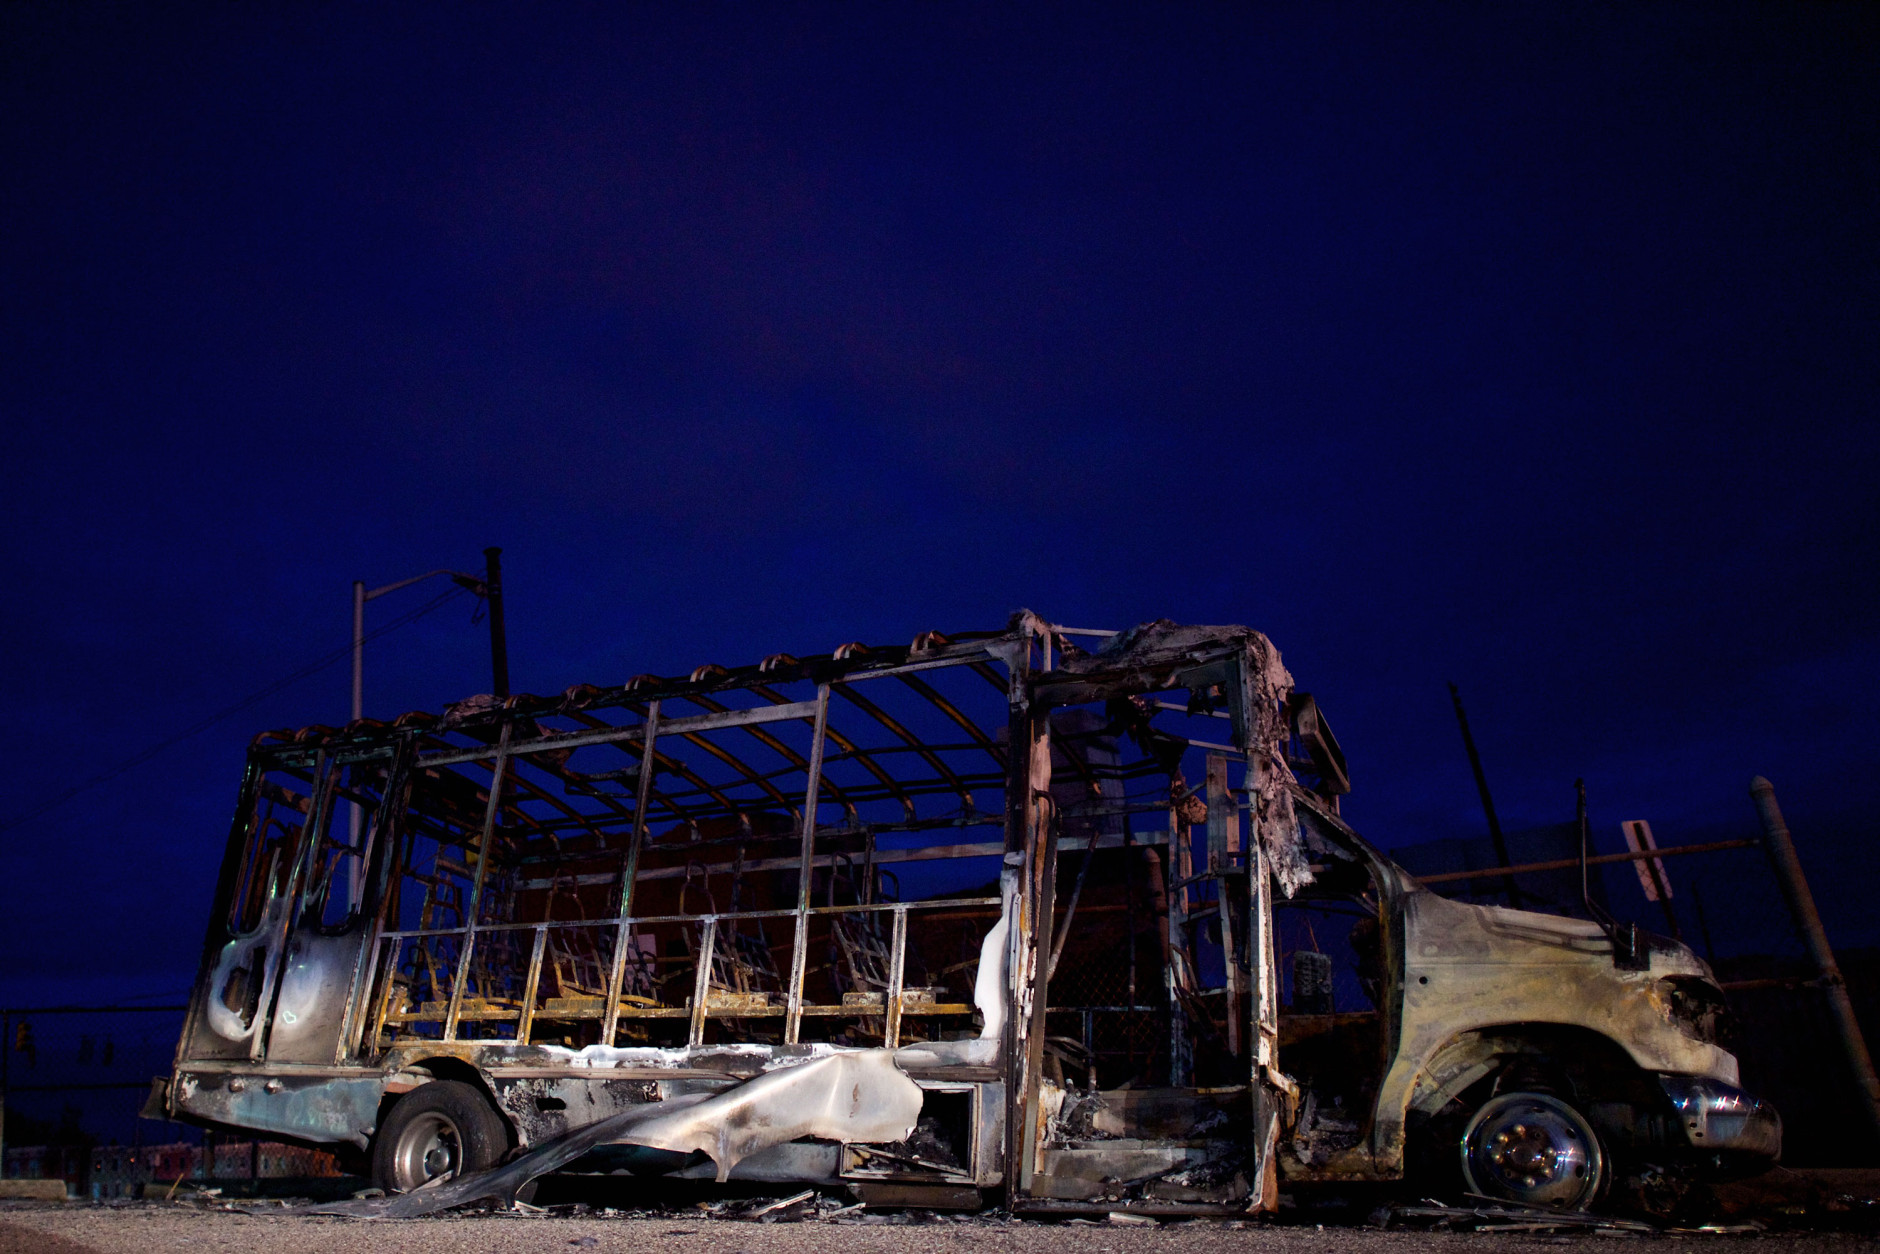 BALTIMORE, MD - APRIL 28: The remains of a senior center bus set ablaze during night riots are seen at dawn on April 28, 2015 in Baltimore, Maryland. Freddie Gray, 25, was arrested for possessing a switch blade knife April 12 outside the Gilmor Houses housing project on Baltimore's west side. According to his attorney, Gray died a week later in the hospital from a severe spinal cord injury he received while in police custody. (Photo by Mark Makela/Getty Images)